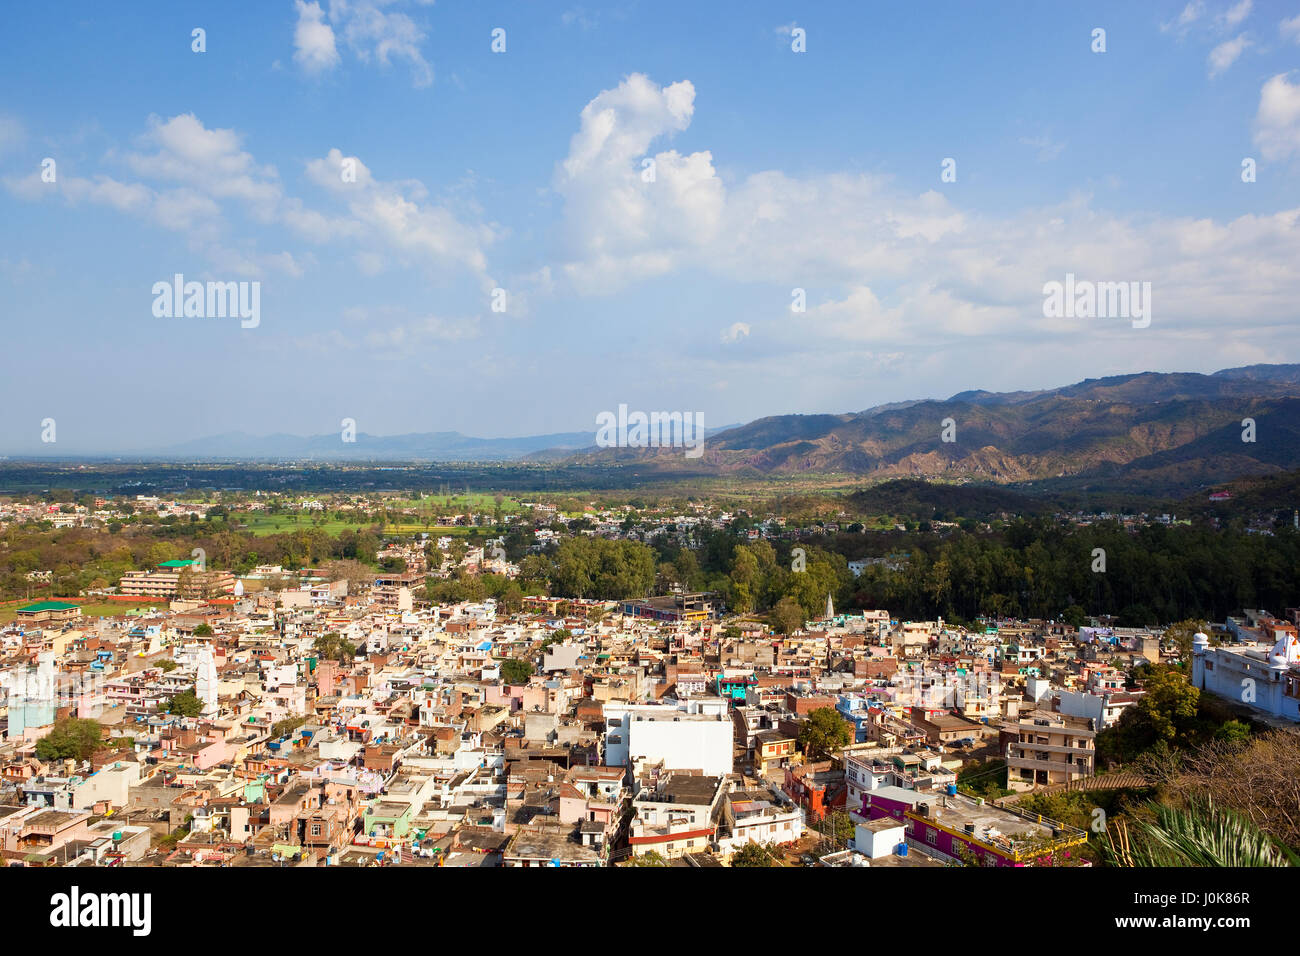 a scenic aerial view of nalagarh city in north india with mountains trees and colorful buildings under a blue cloudy sky in springtime Stock Photo